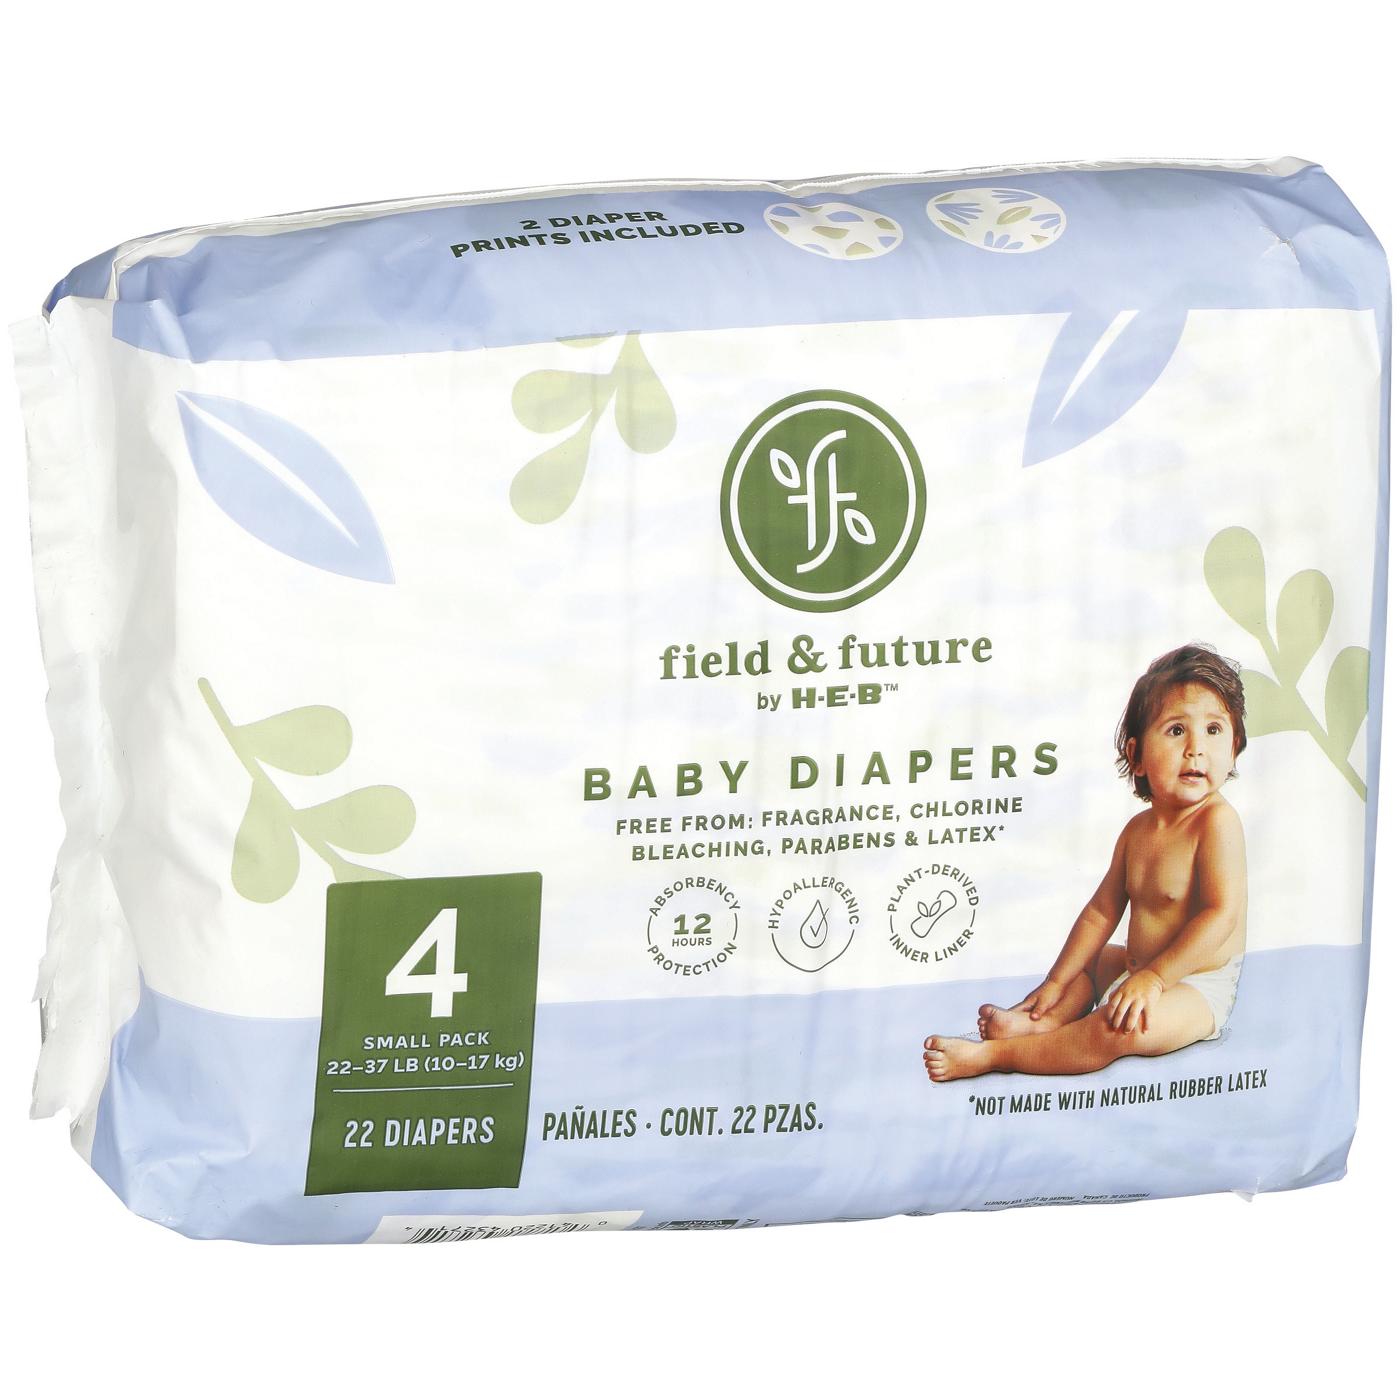 Field & Future by H-E-B Jumbo Pack Baby Diapers  - Size 4; image 2 of 2